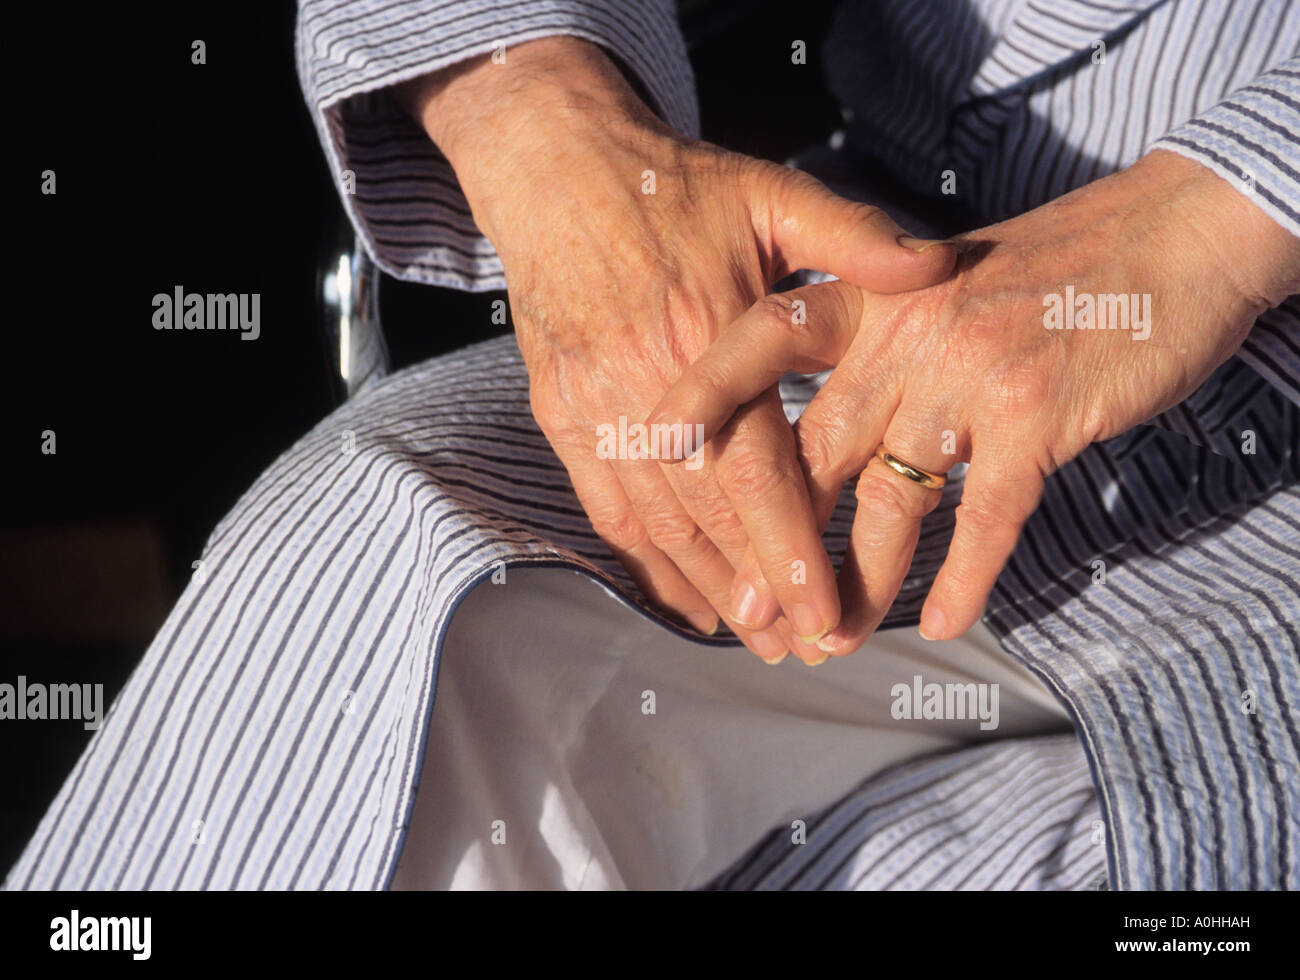 elderly man alone, in a wheelchair, during the pandemic lockdown, isolated because of illness Nursing home patient in a bathrobe. Stock Photo